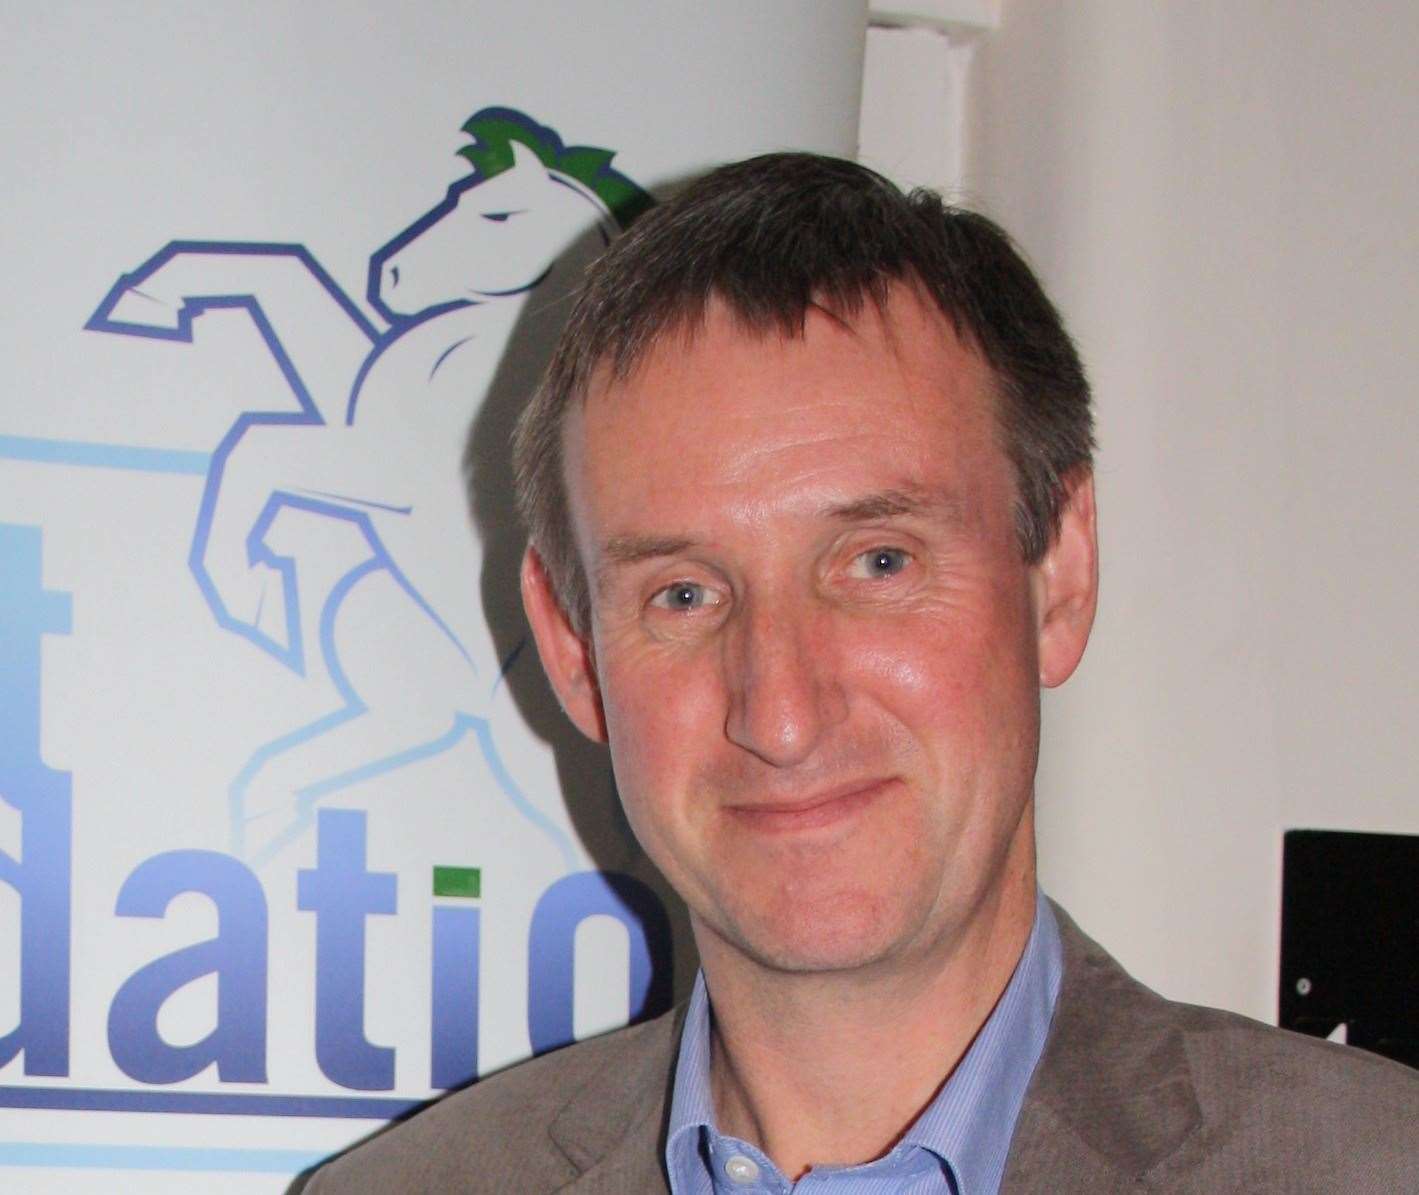 The Green Party's Martin Whybrow